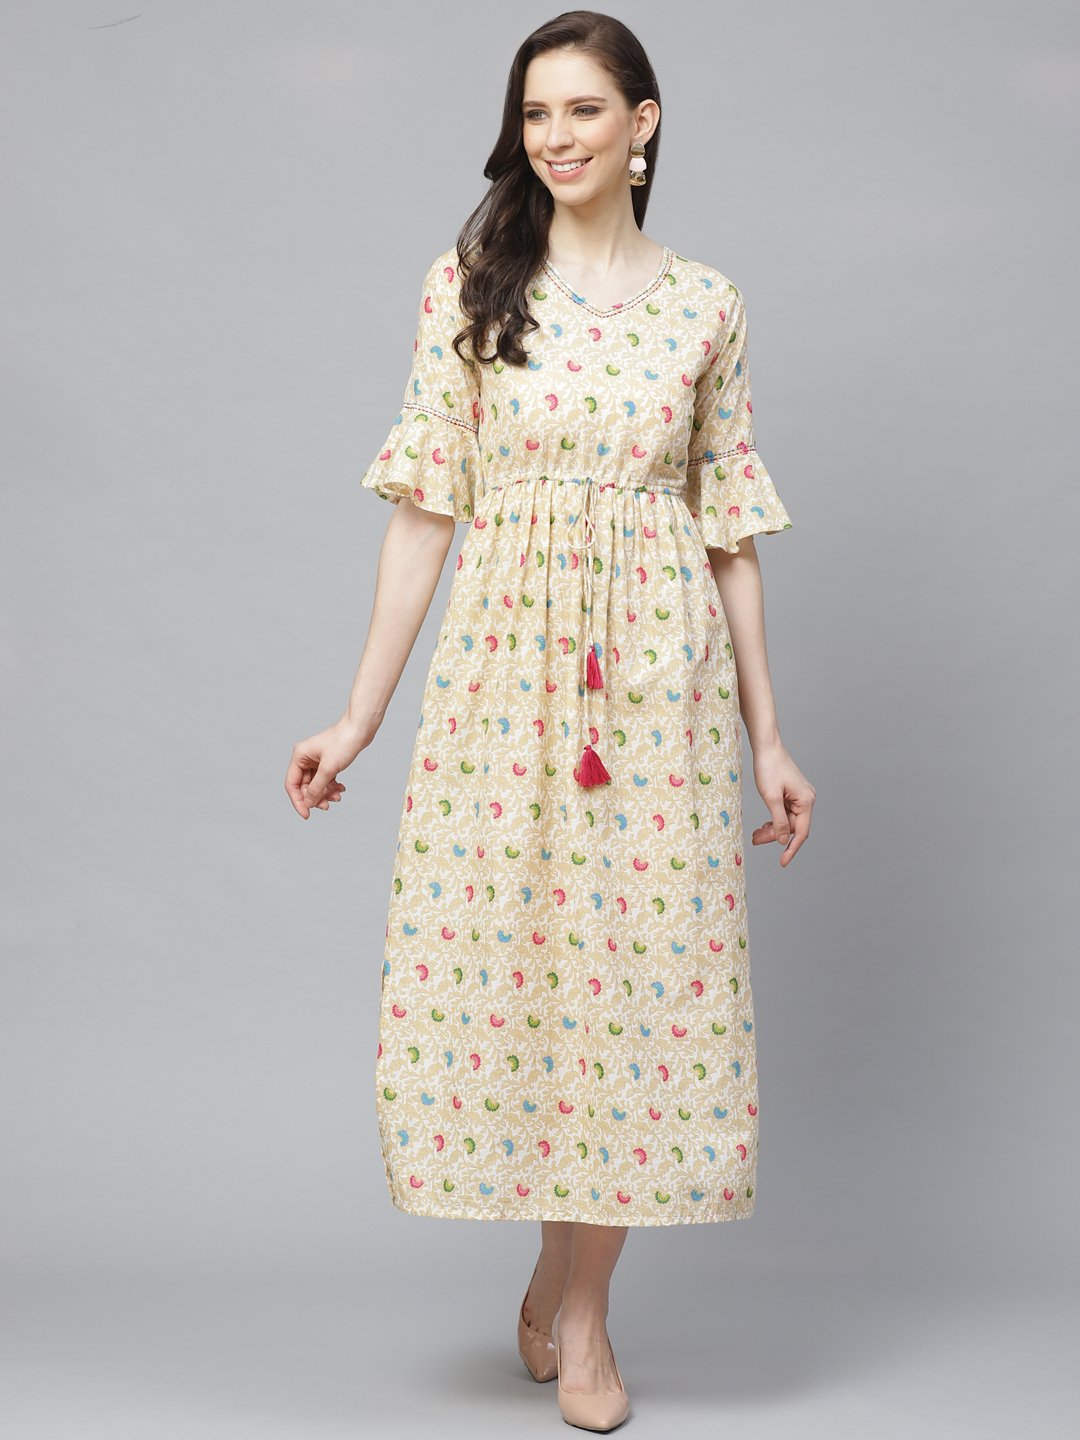 Women's White Floral Printed V-Neck Cotton Fit And Flare Dress - Nayo Clothing